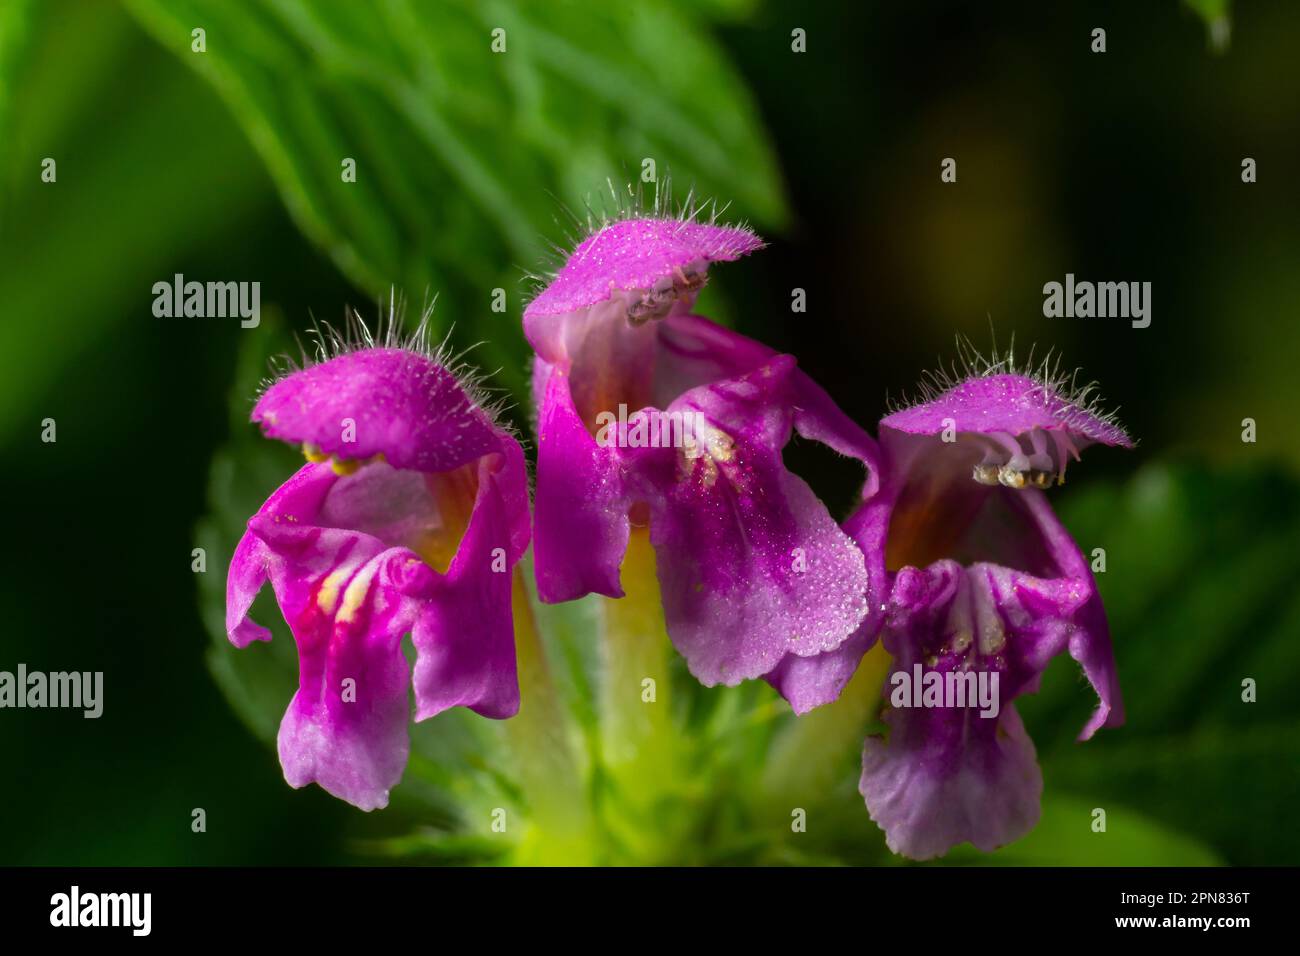 Pink flowers of spotted dead-nettle Lamium maculatum. Medicinal plants in the garden. Stock Photo